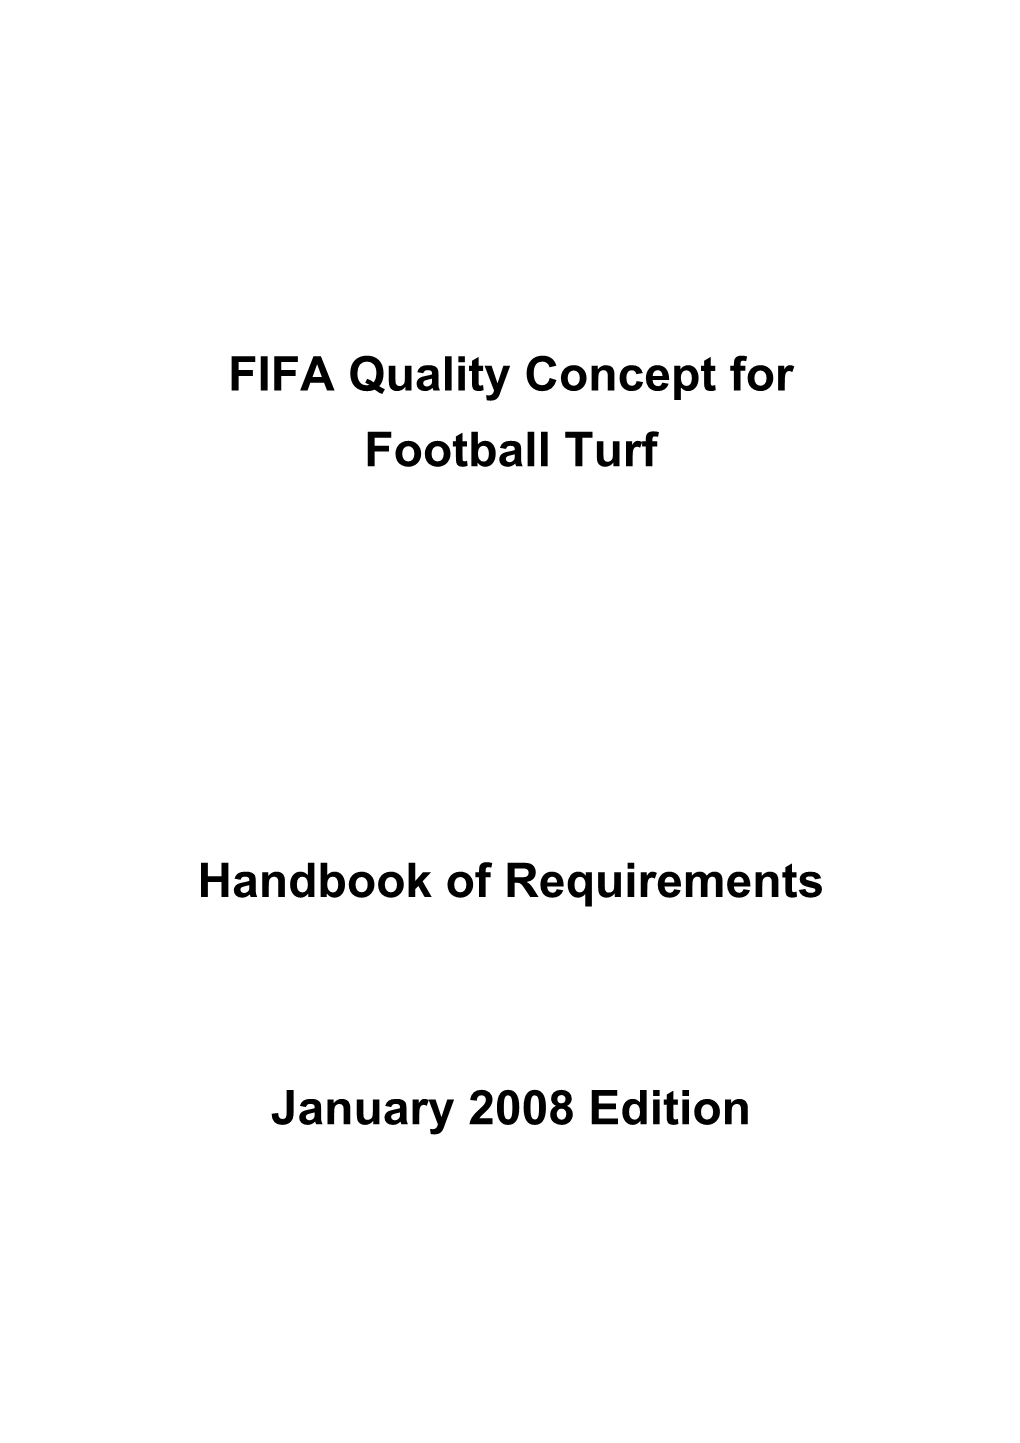 Artificial Turf Requirements, 2008